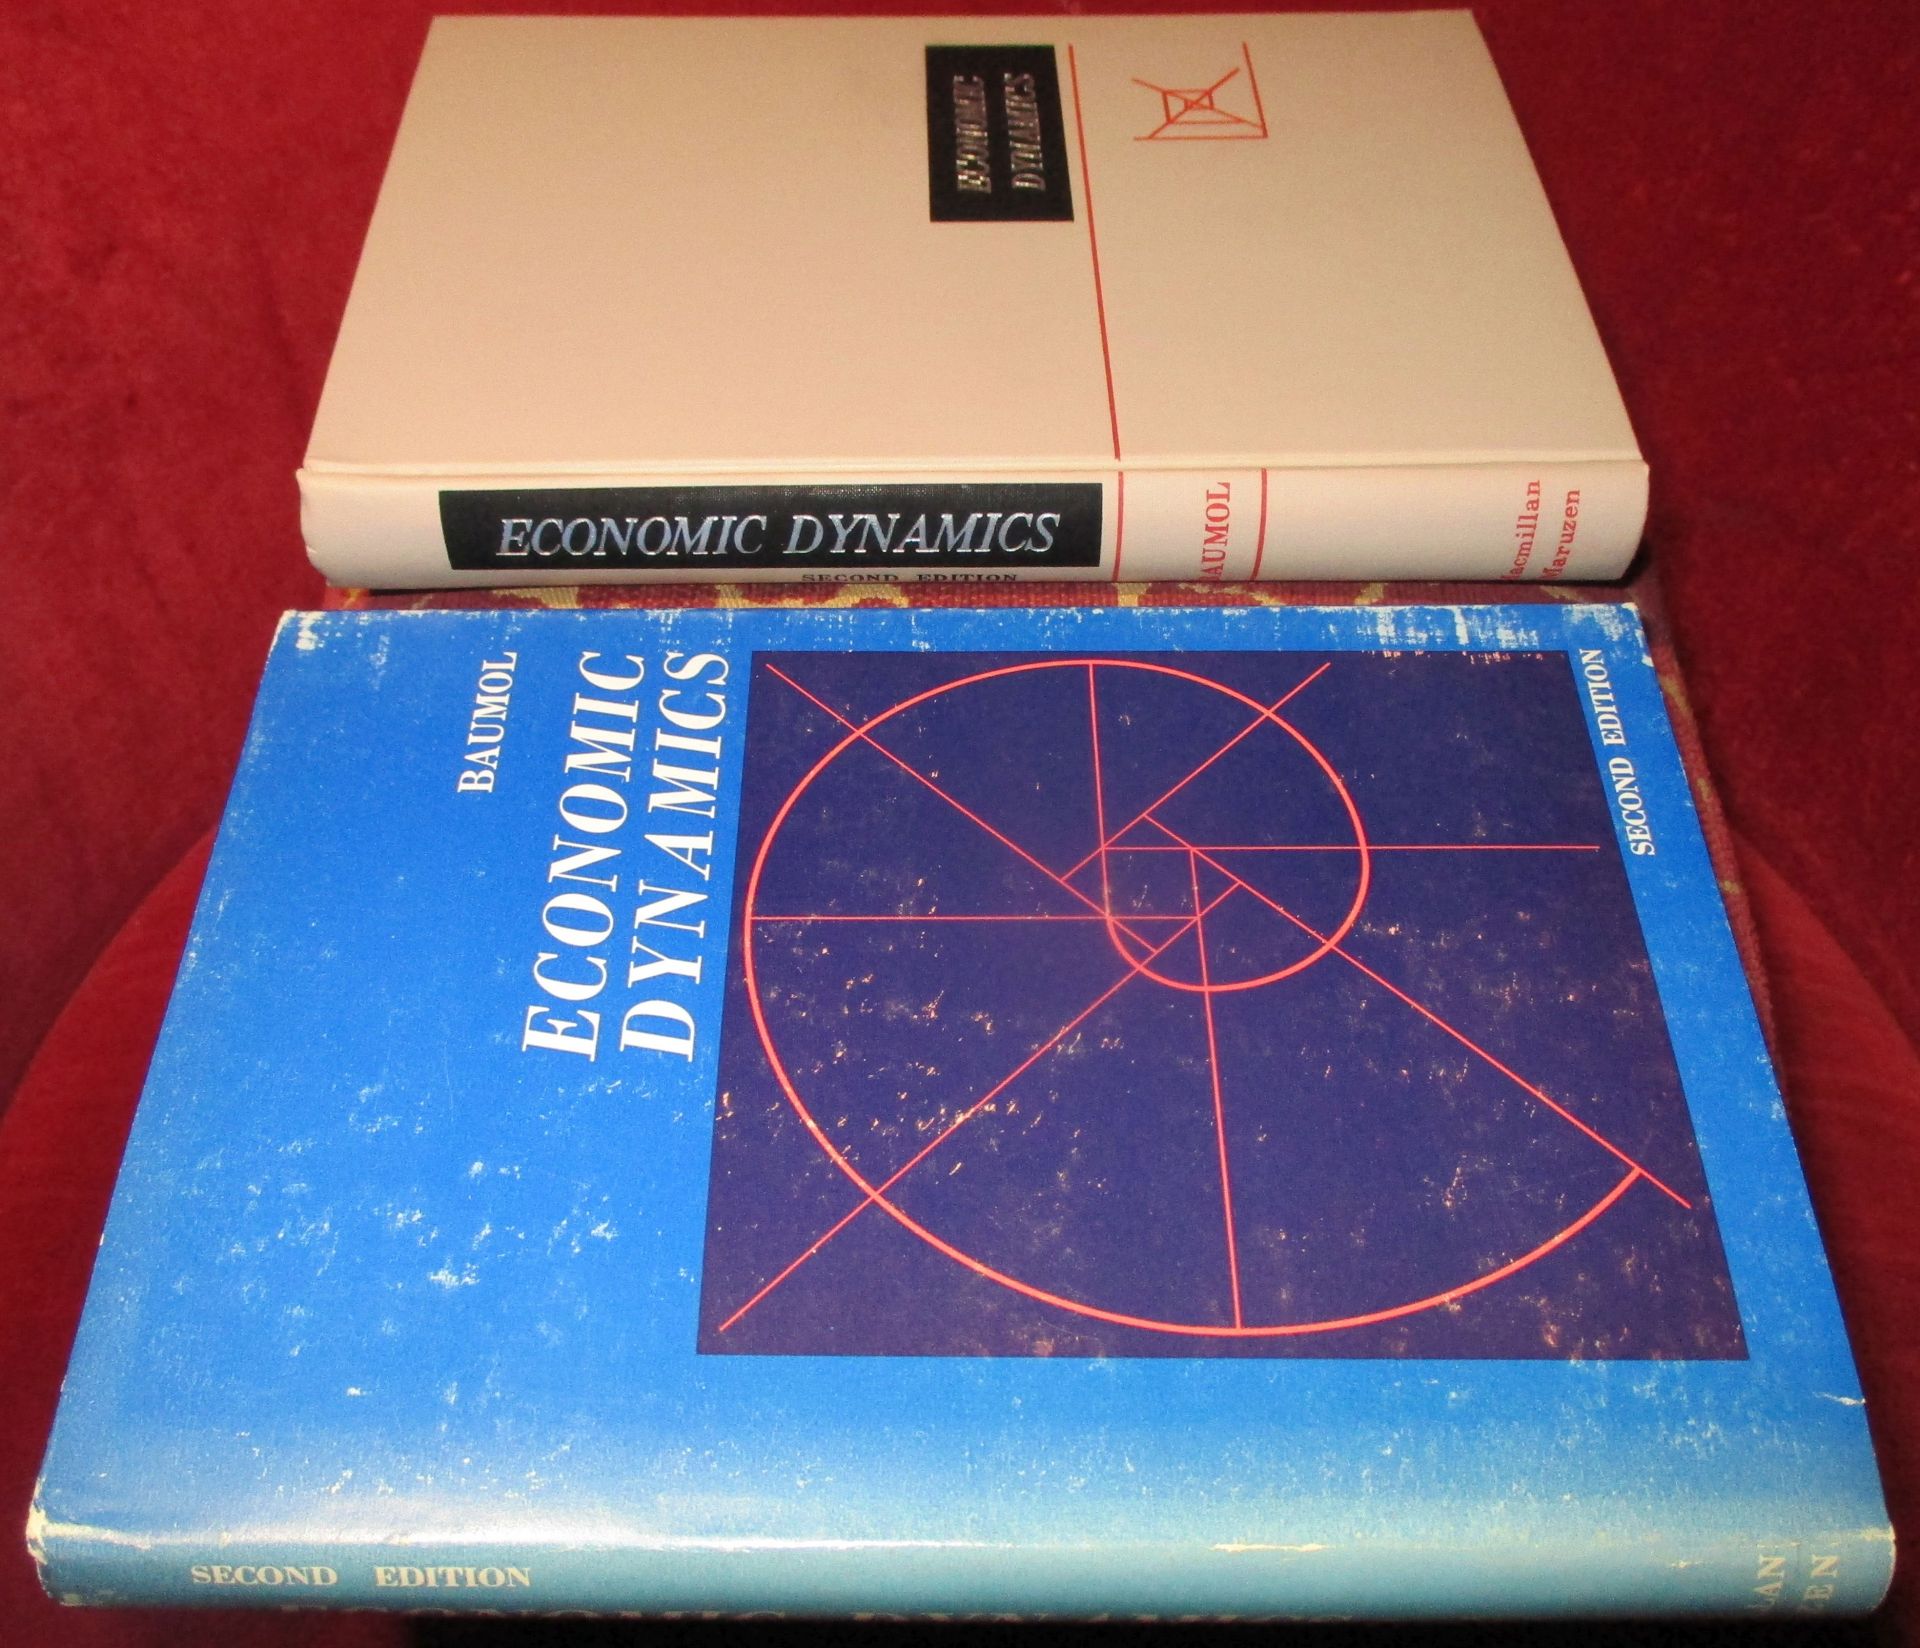 William J. Baumol, with a contribution by Ralph Turvey. Economic Dynamics. An Introduction.